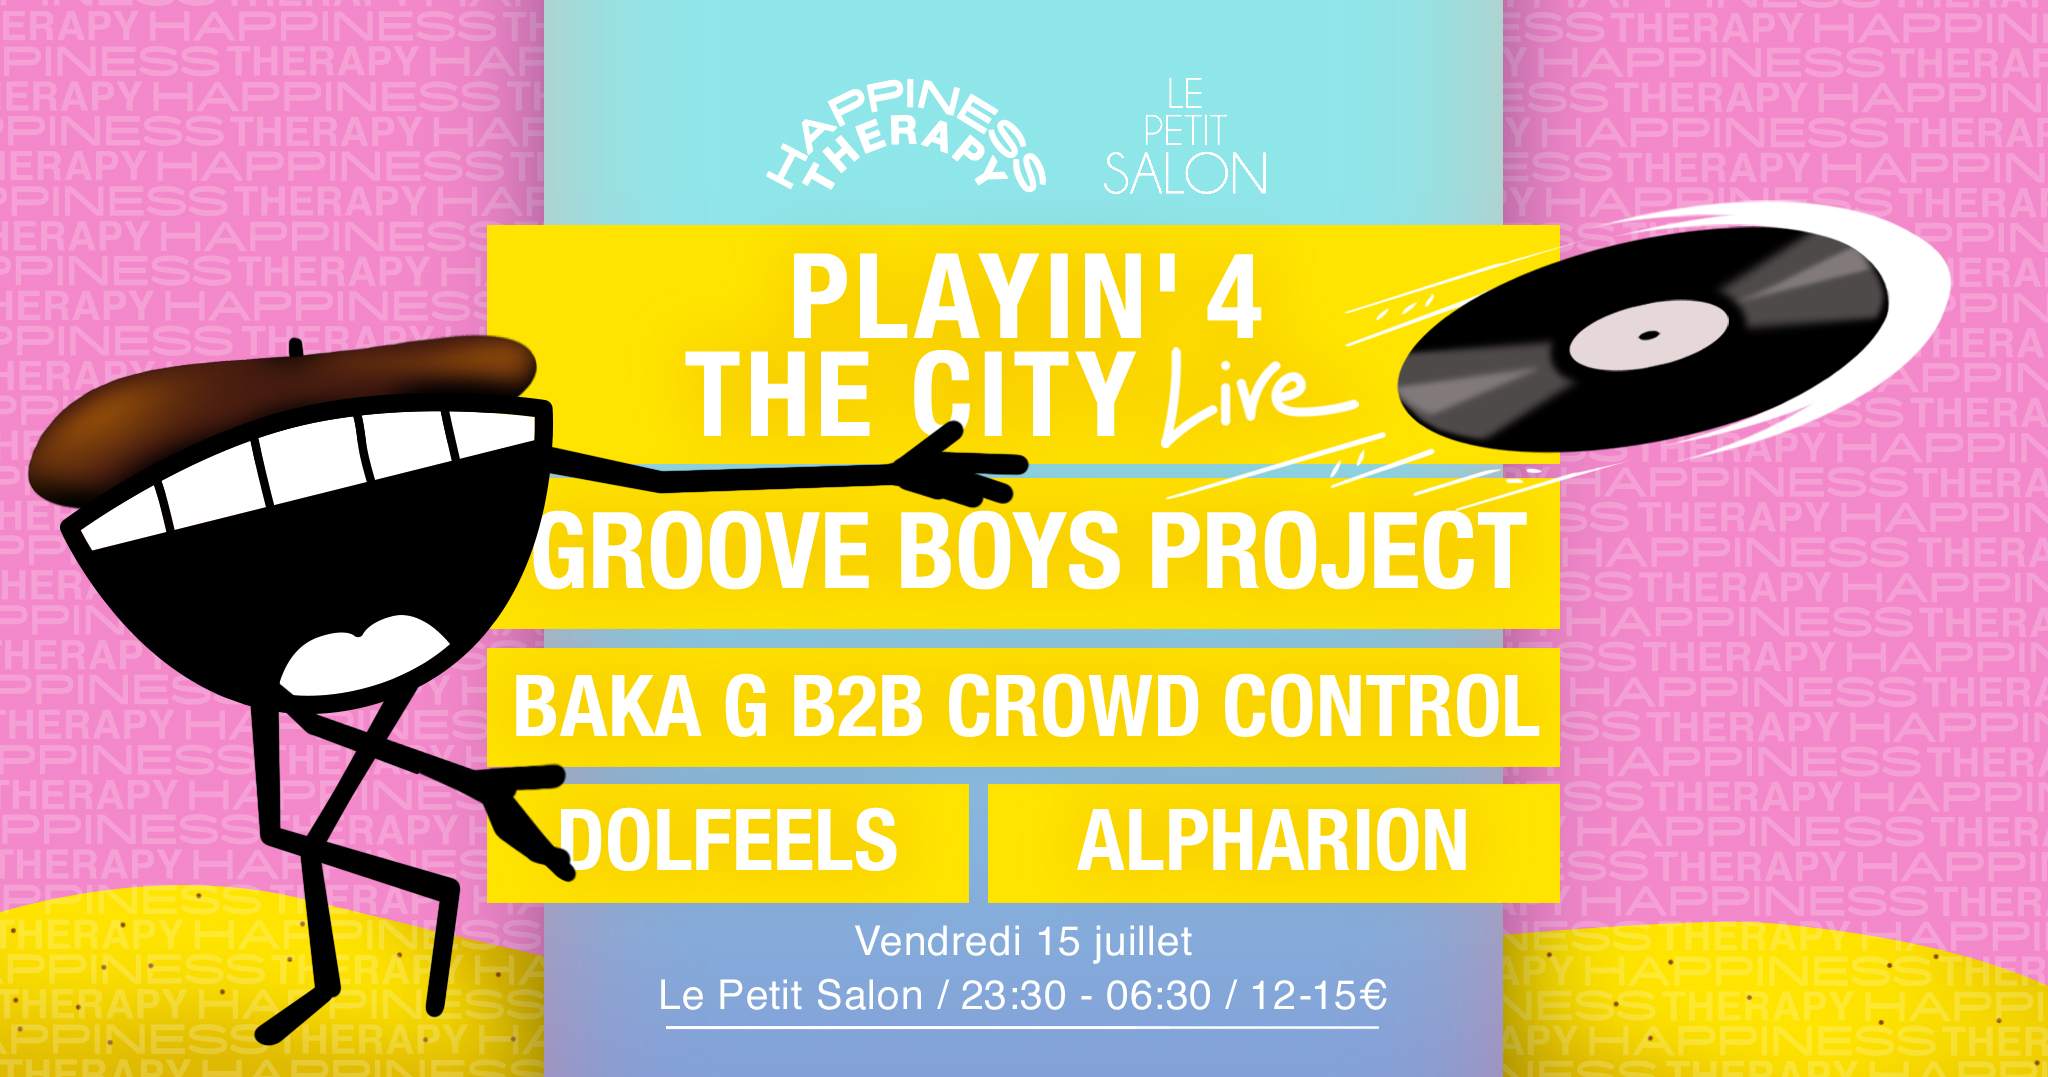 Happiness Therapy: Playin' 4 The City Live, Groove Boys Project, Baka G b2b Crowd Control - Página frontal